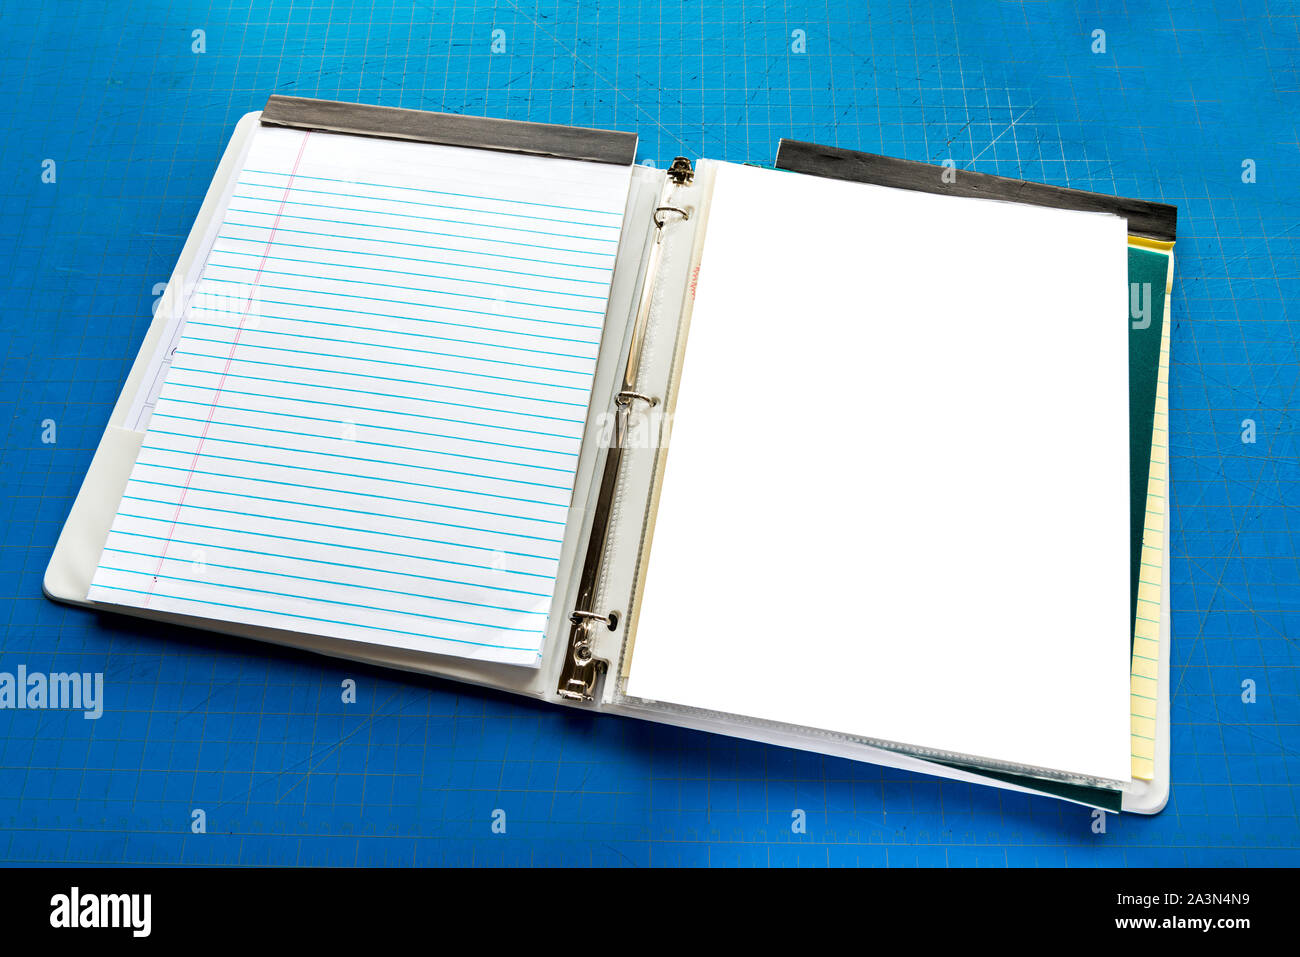 Horizontal shot of an Open Notebook With Copy Space Against Blue Cutting Board Background. Stock Photo